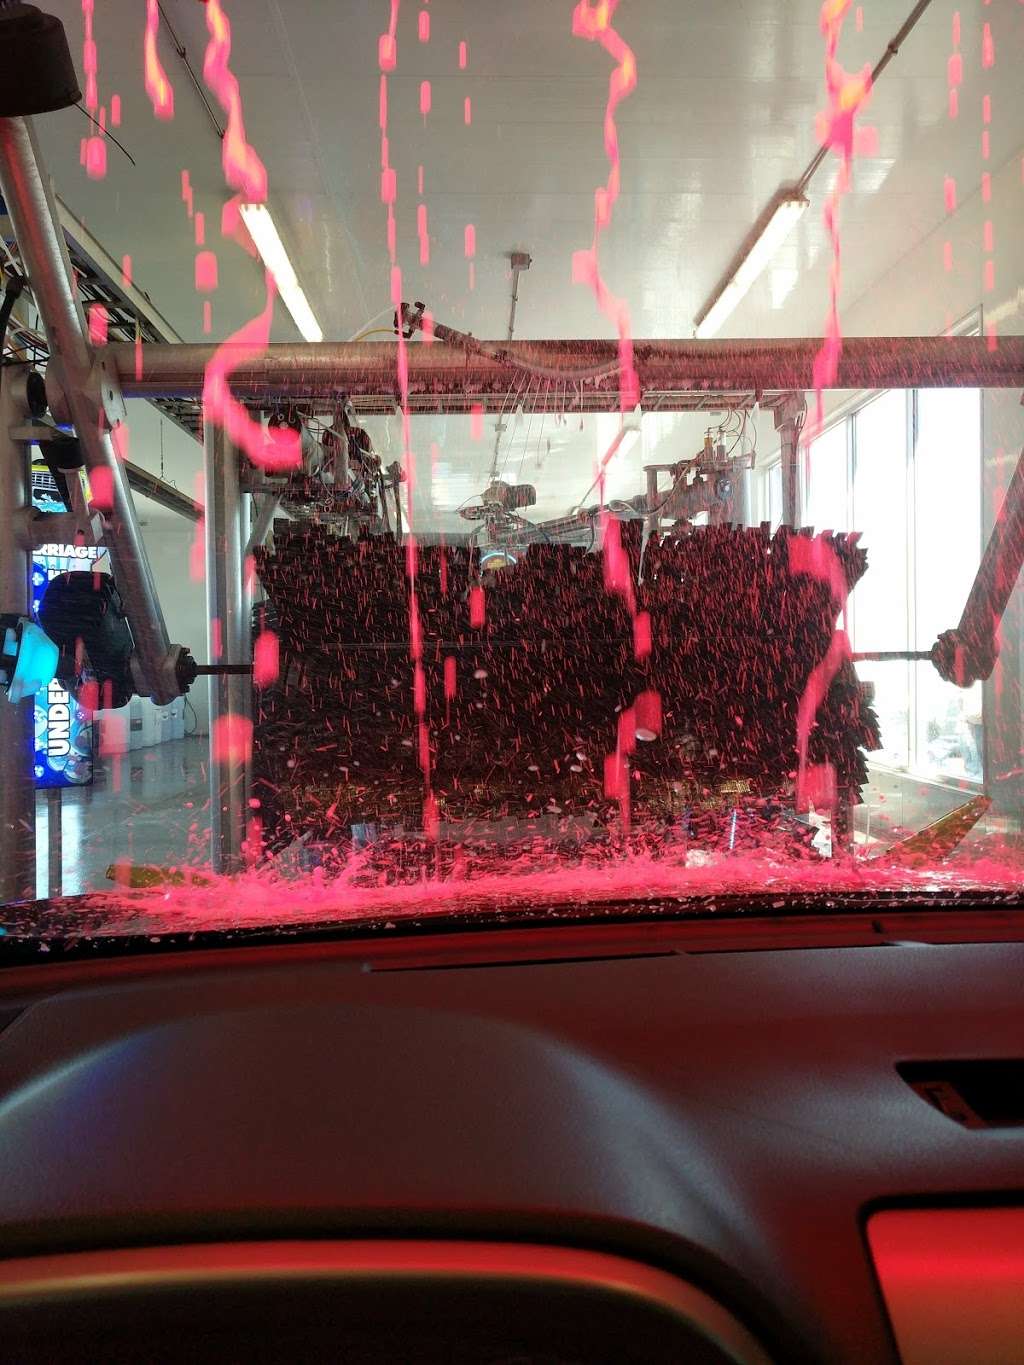 Personal Touch Express Car Wash, 504 Killingly St